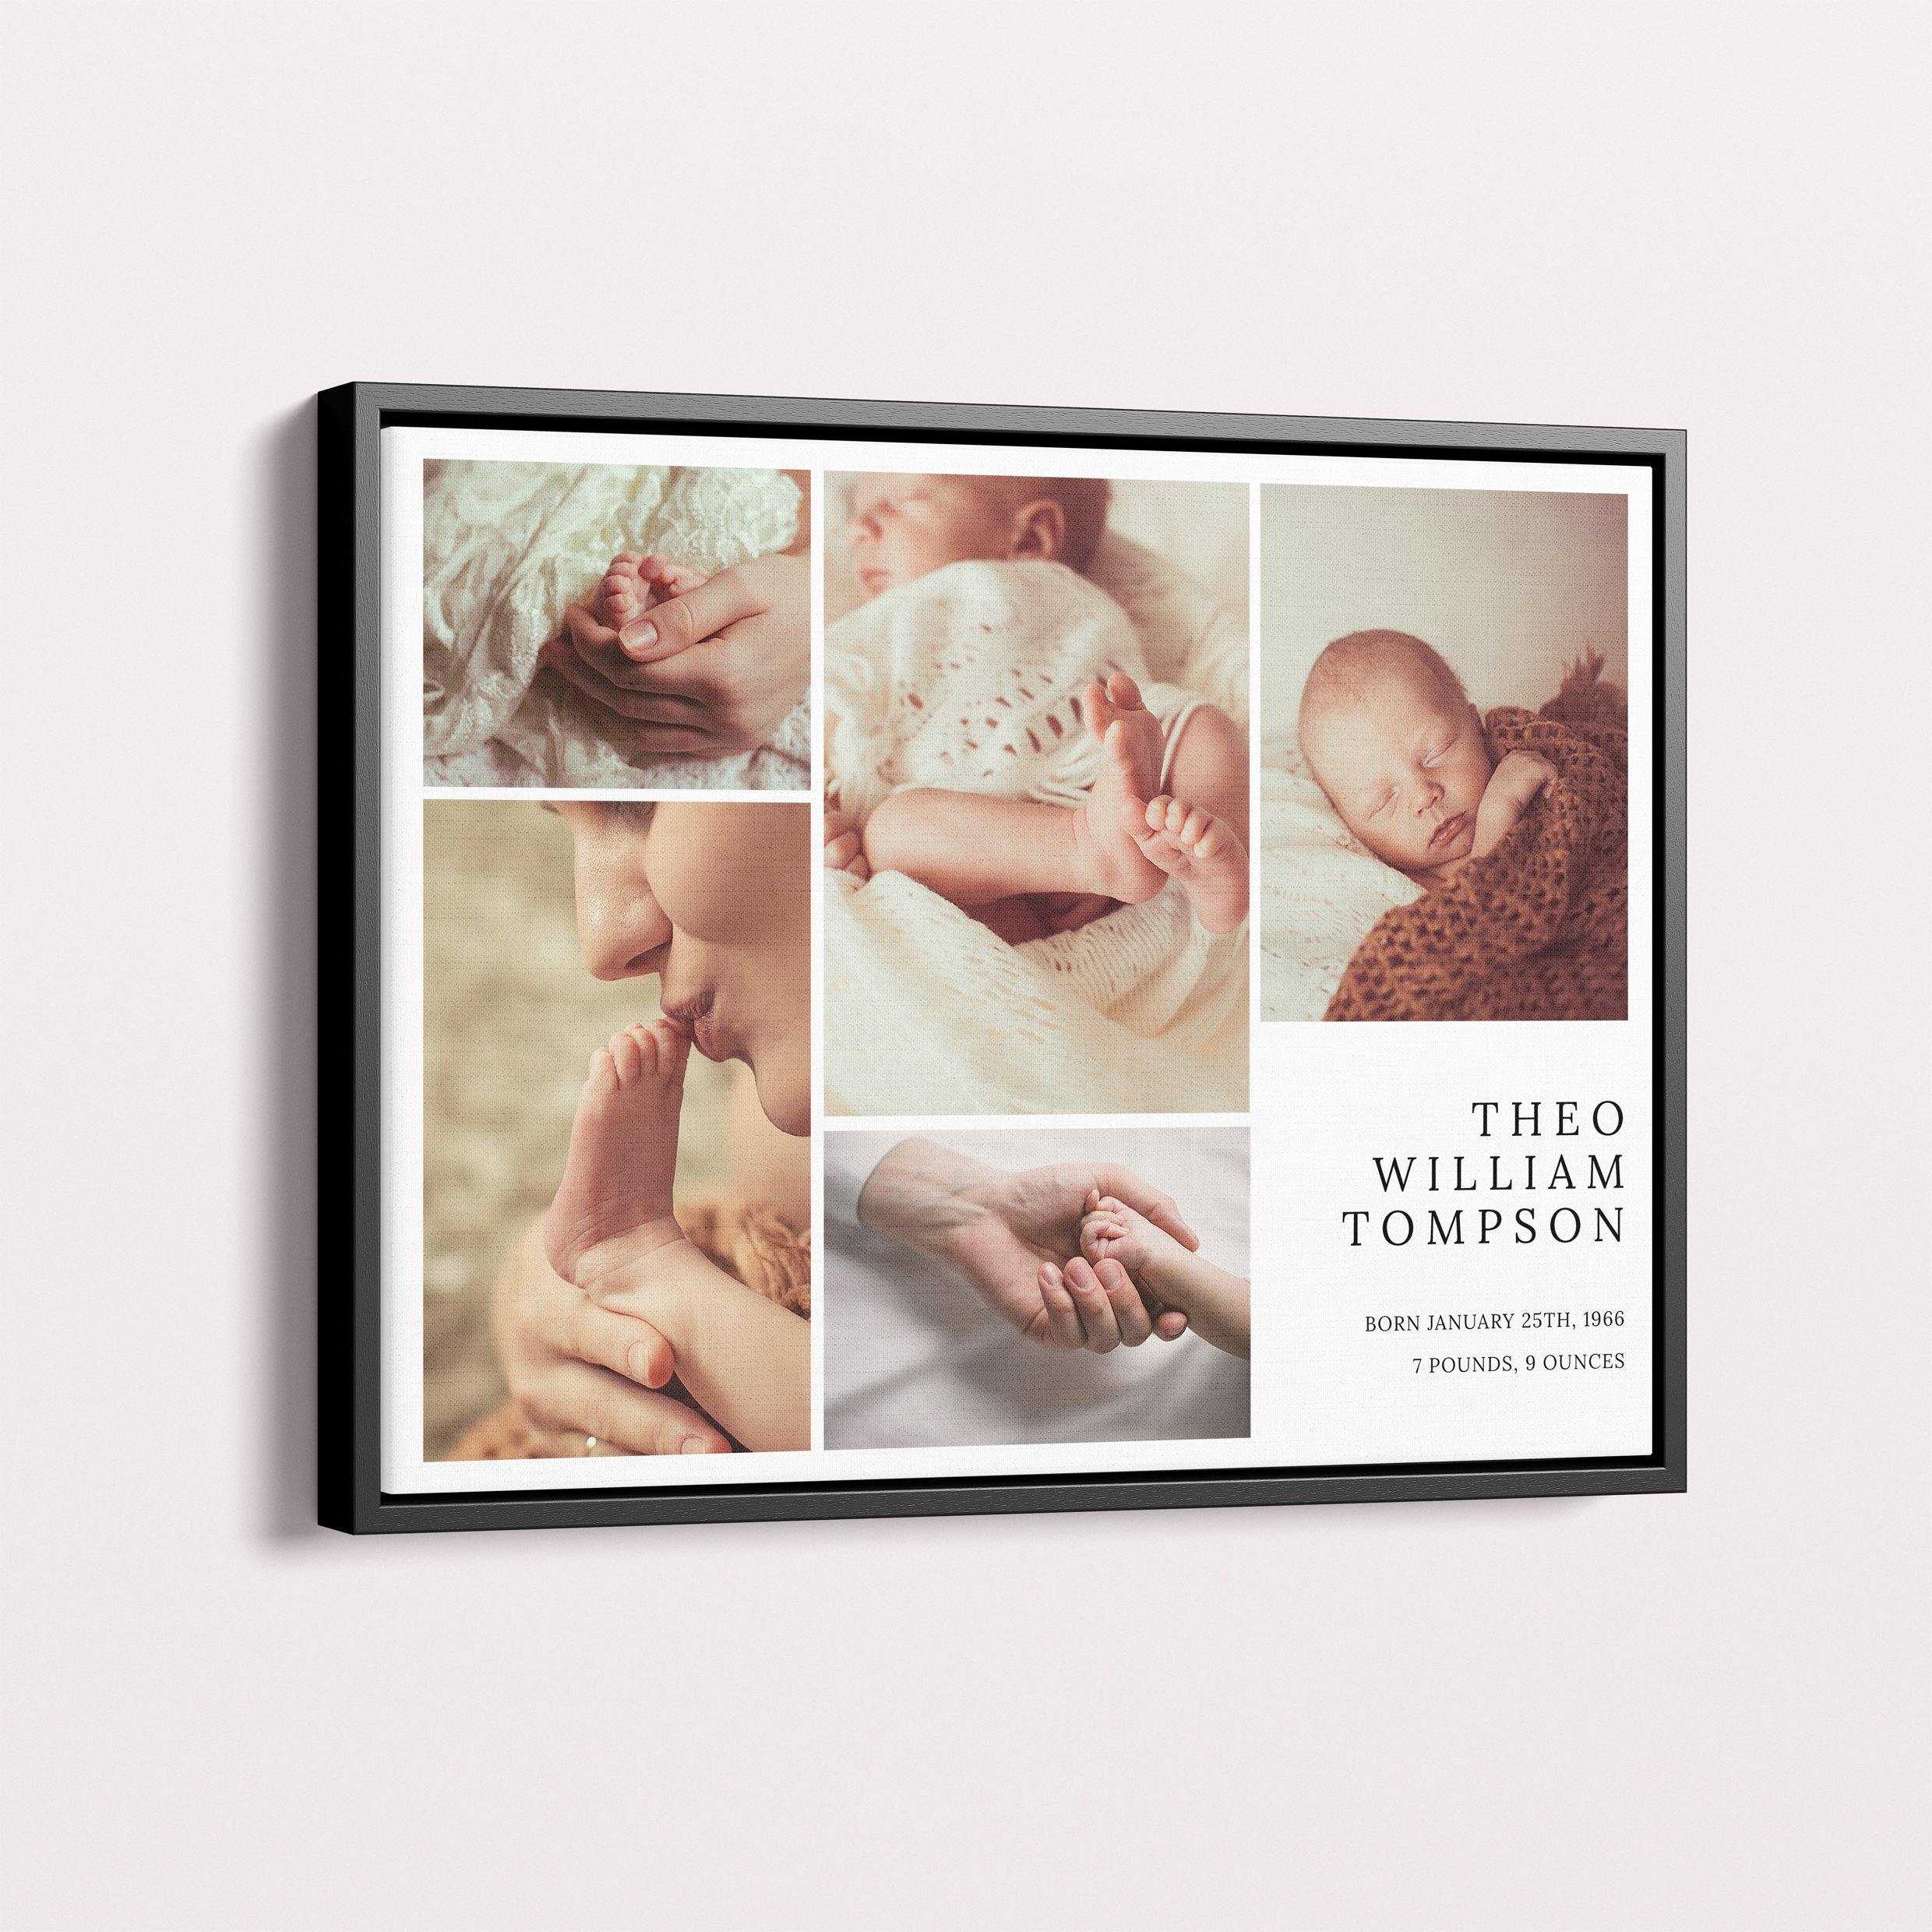 Personalised Little Love Collage Framed Photo Canvas - Transform Memories with Utterly Printable